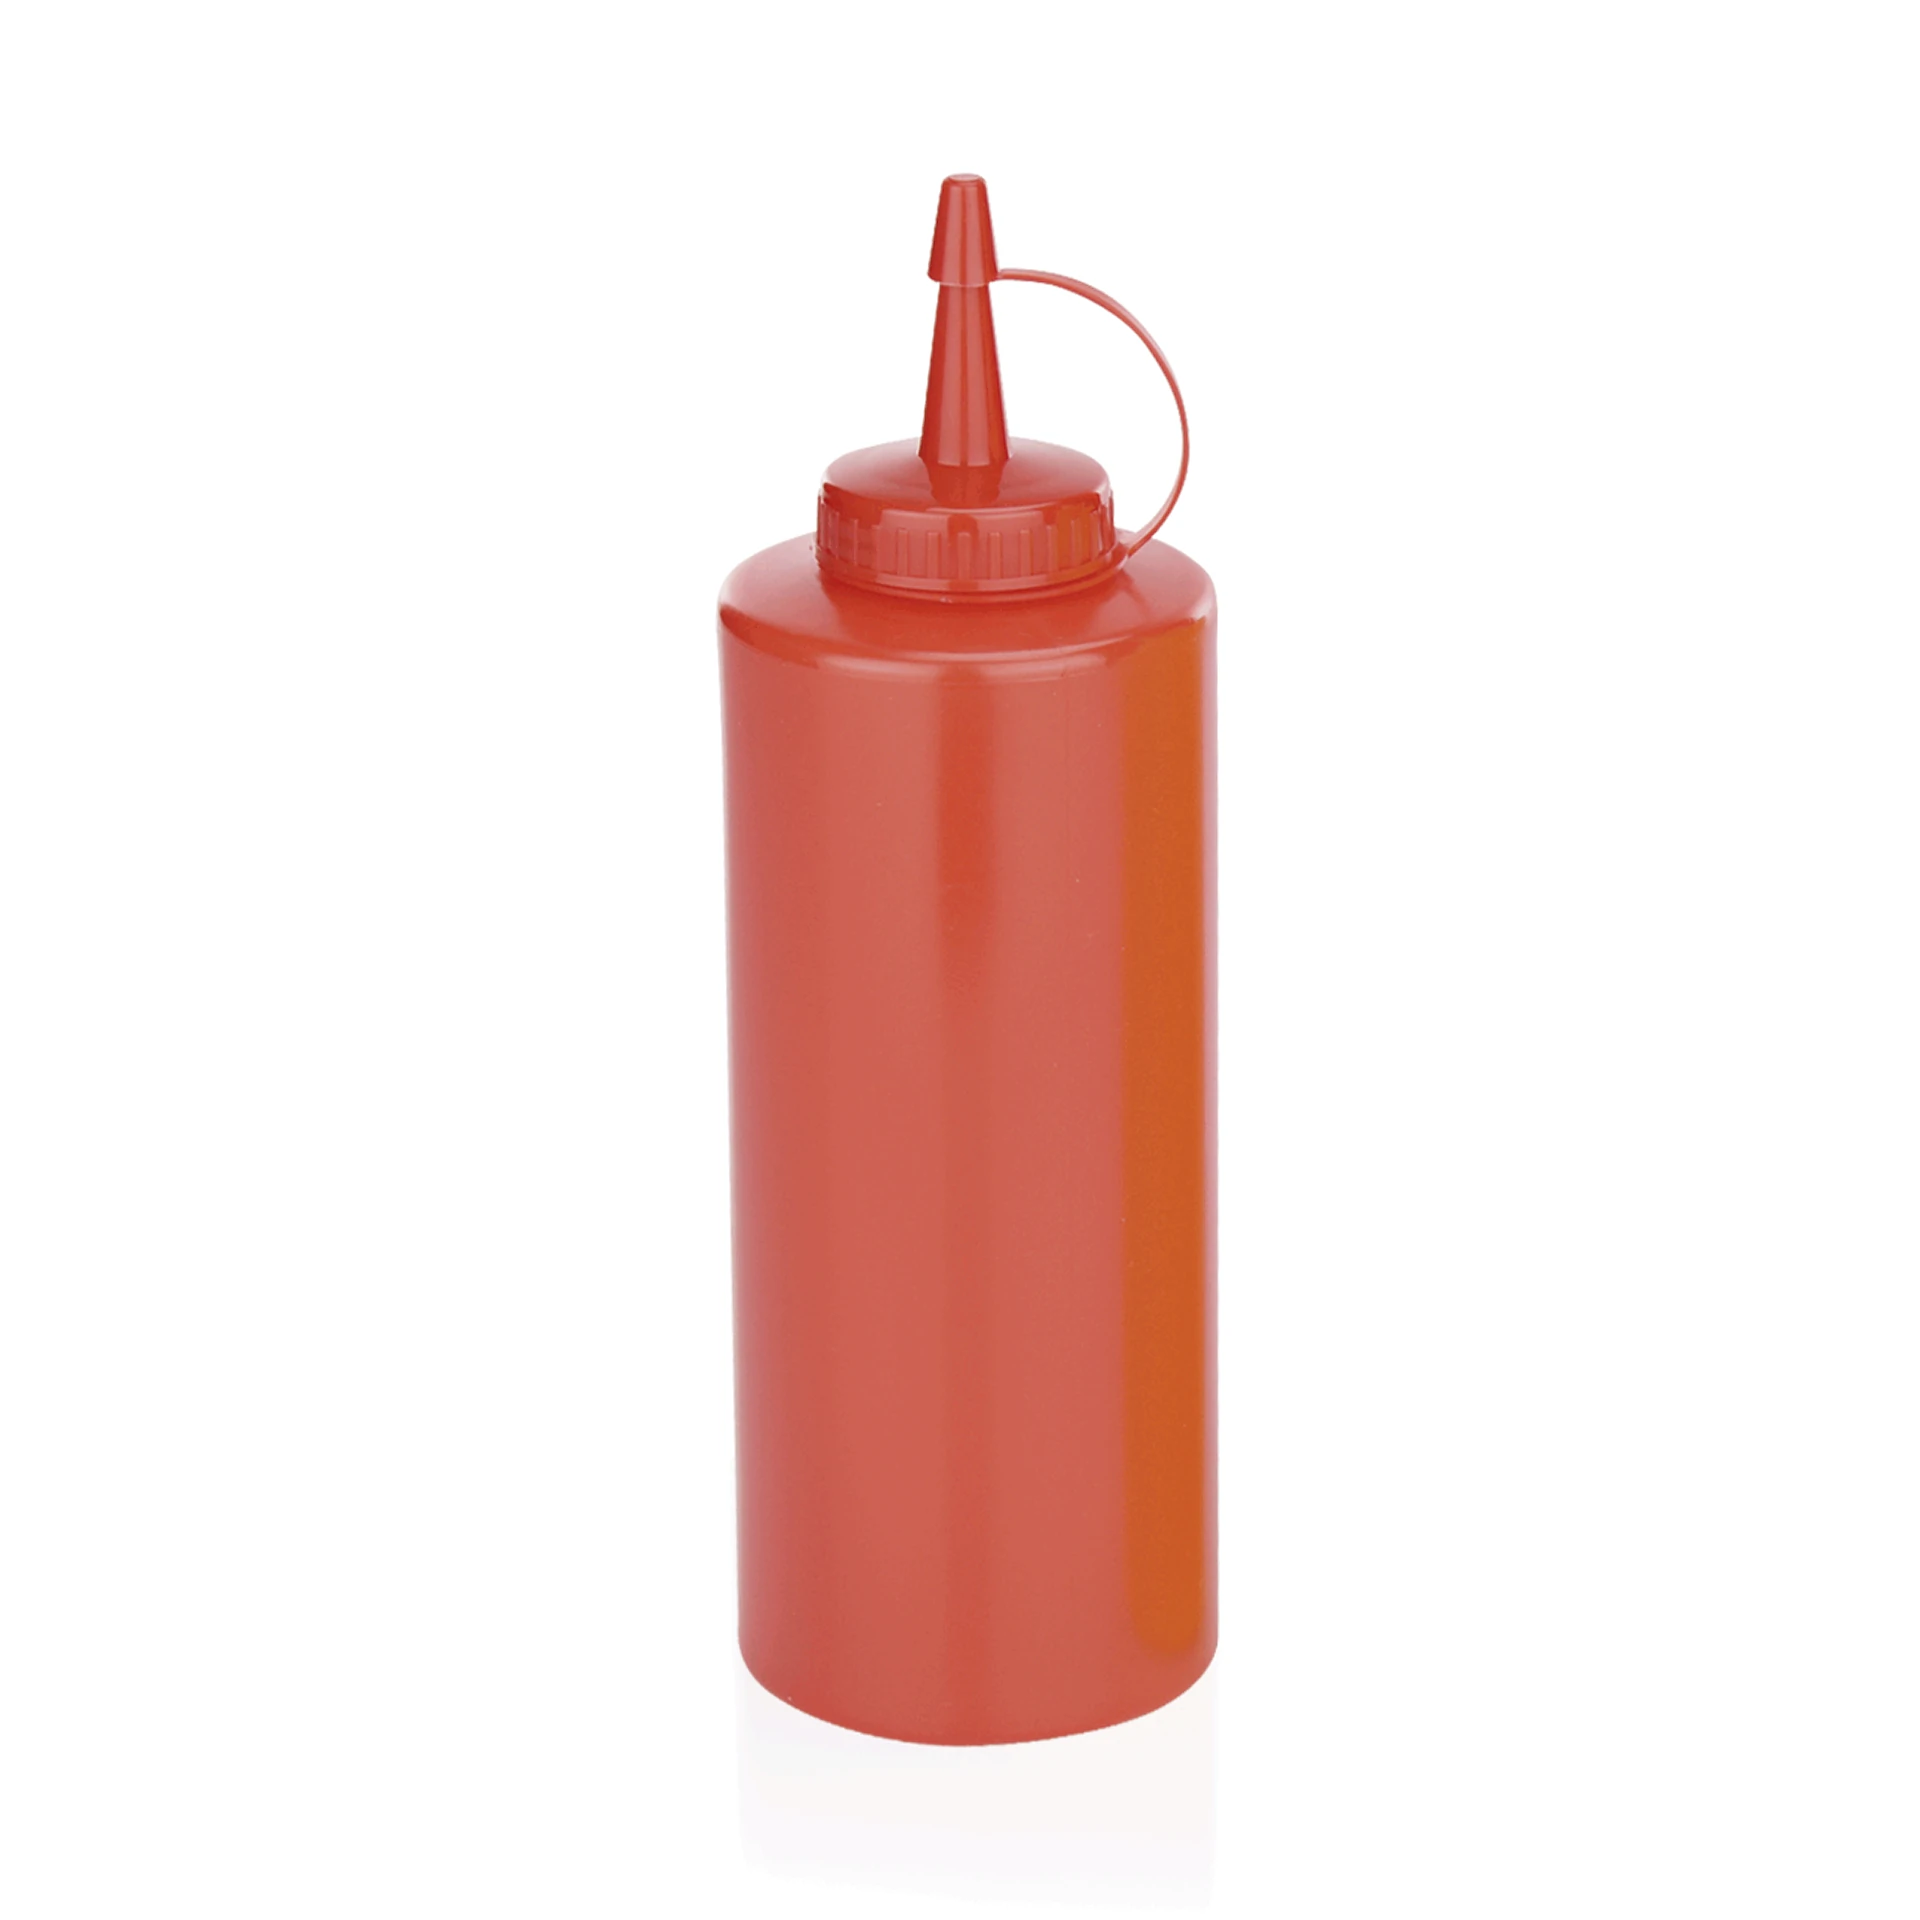 Squeeze bottle Red